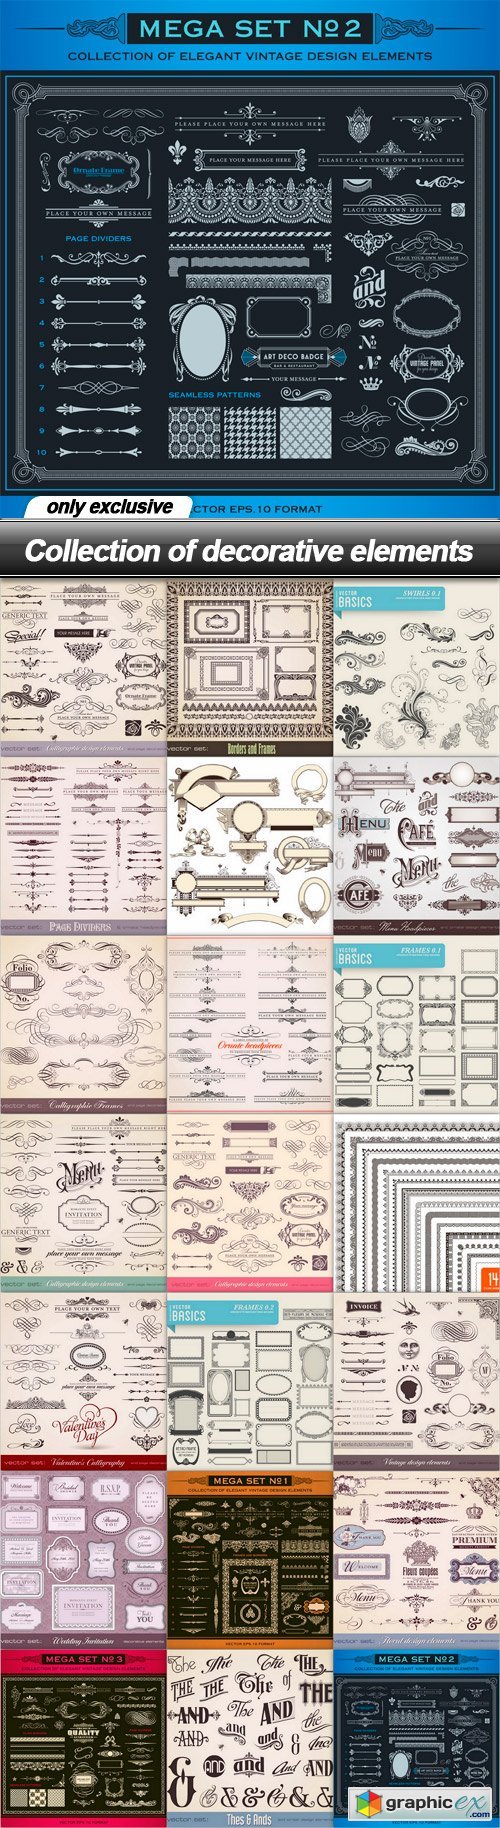 Collection of decorative elements - 21 EPS